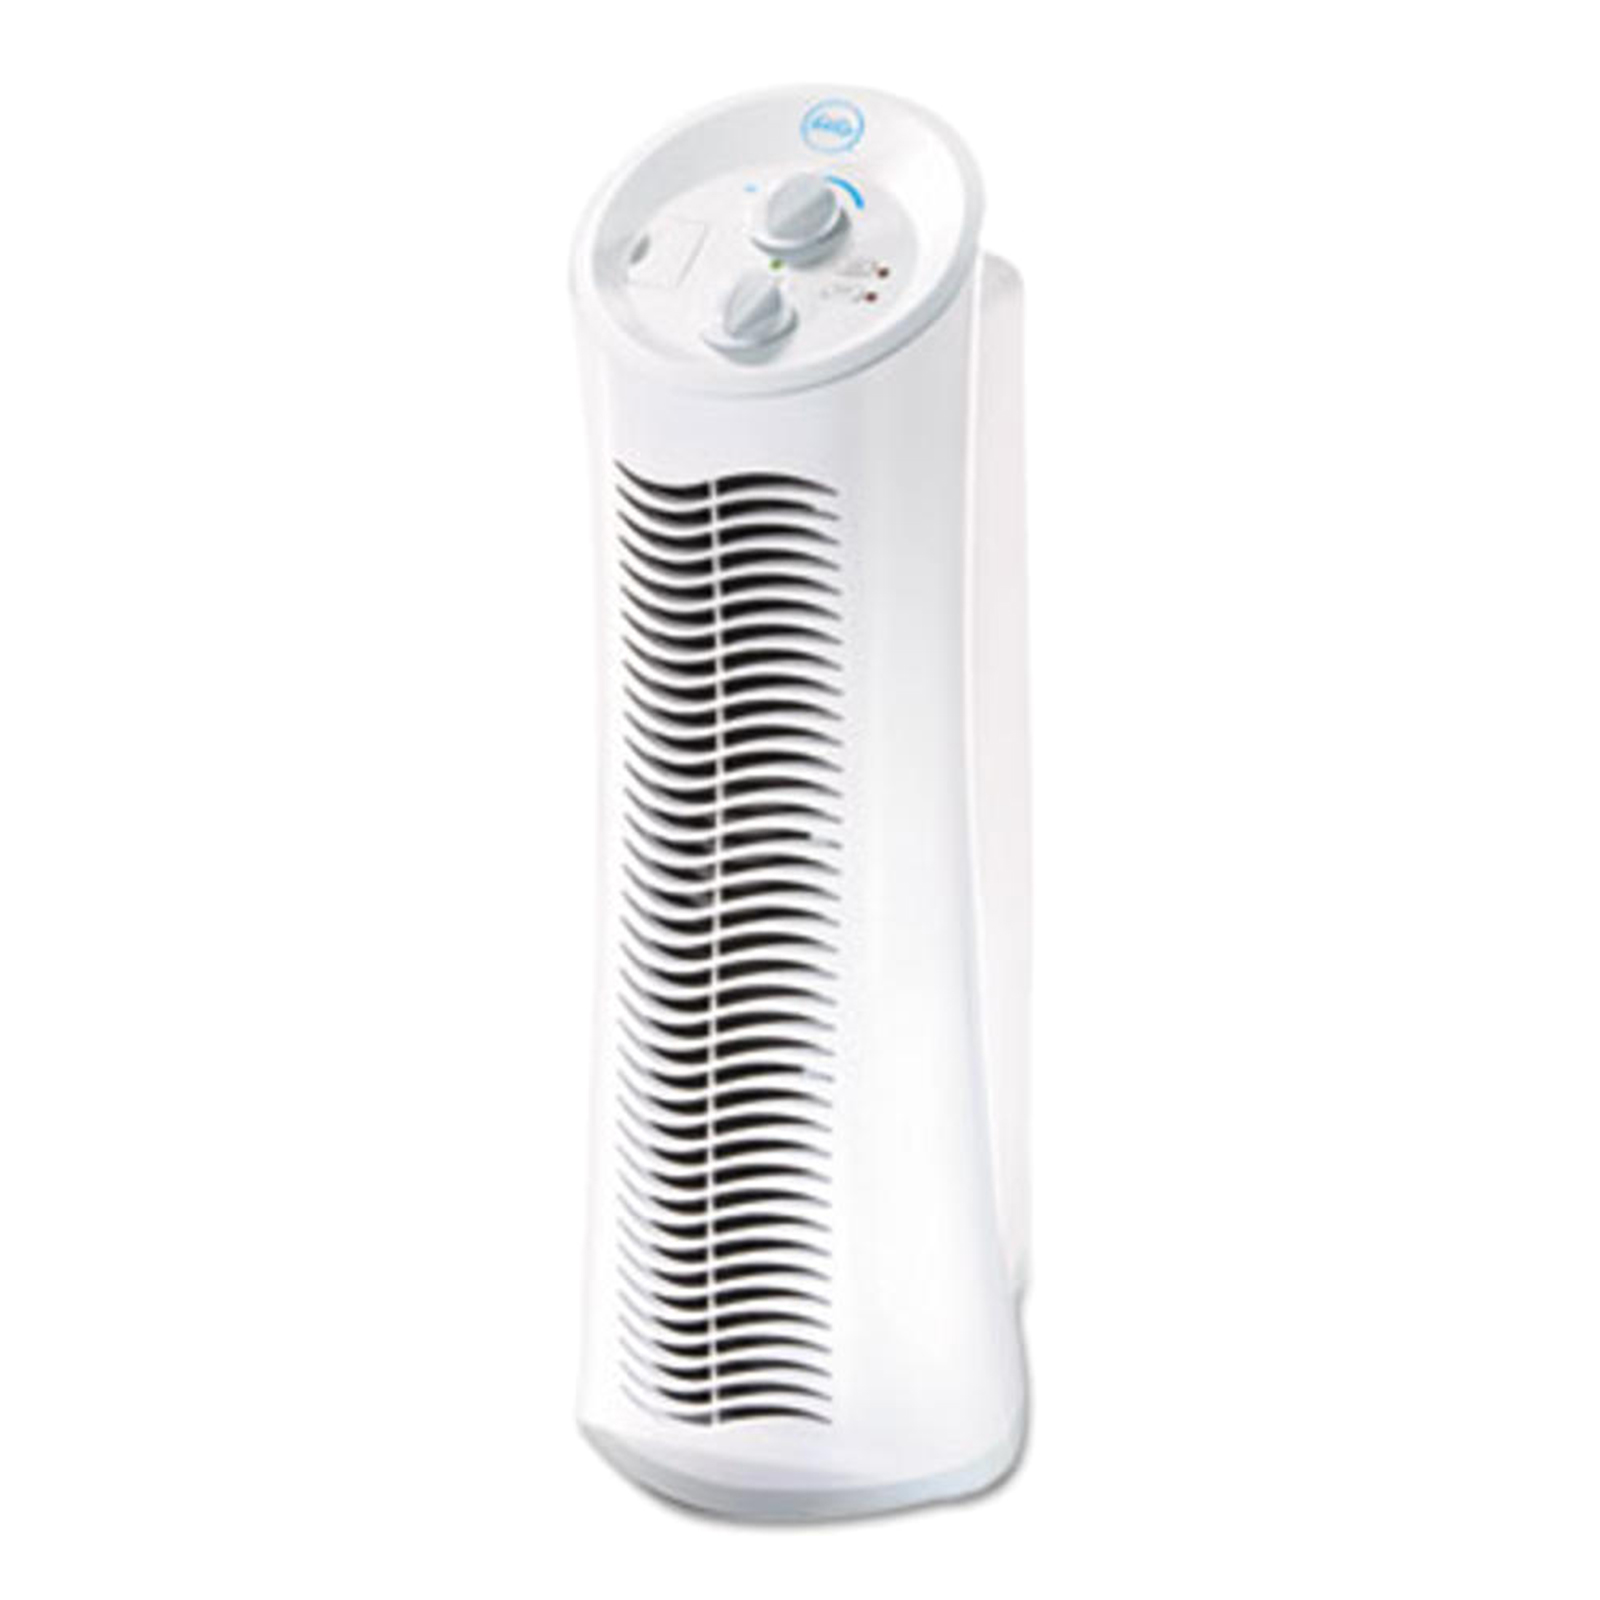 Honeywell FHT190W 25" HEPA-Type Tower Air Purifier with 3 Cleaning Levels - White